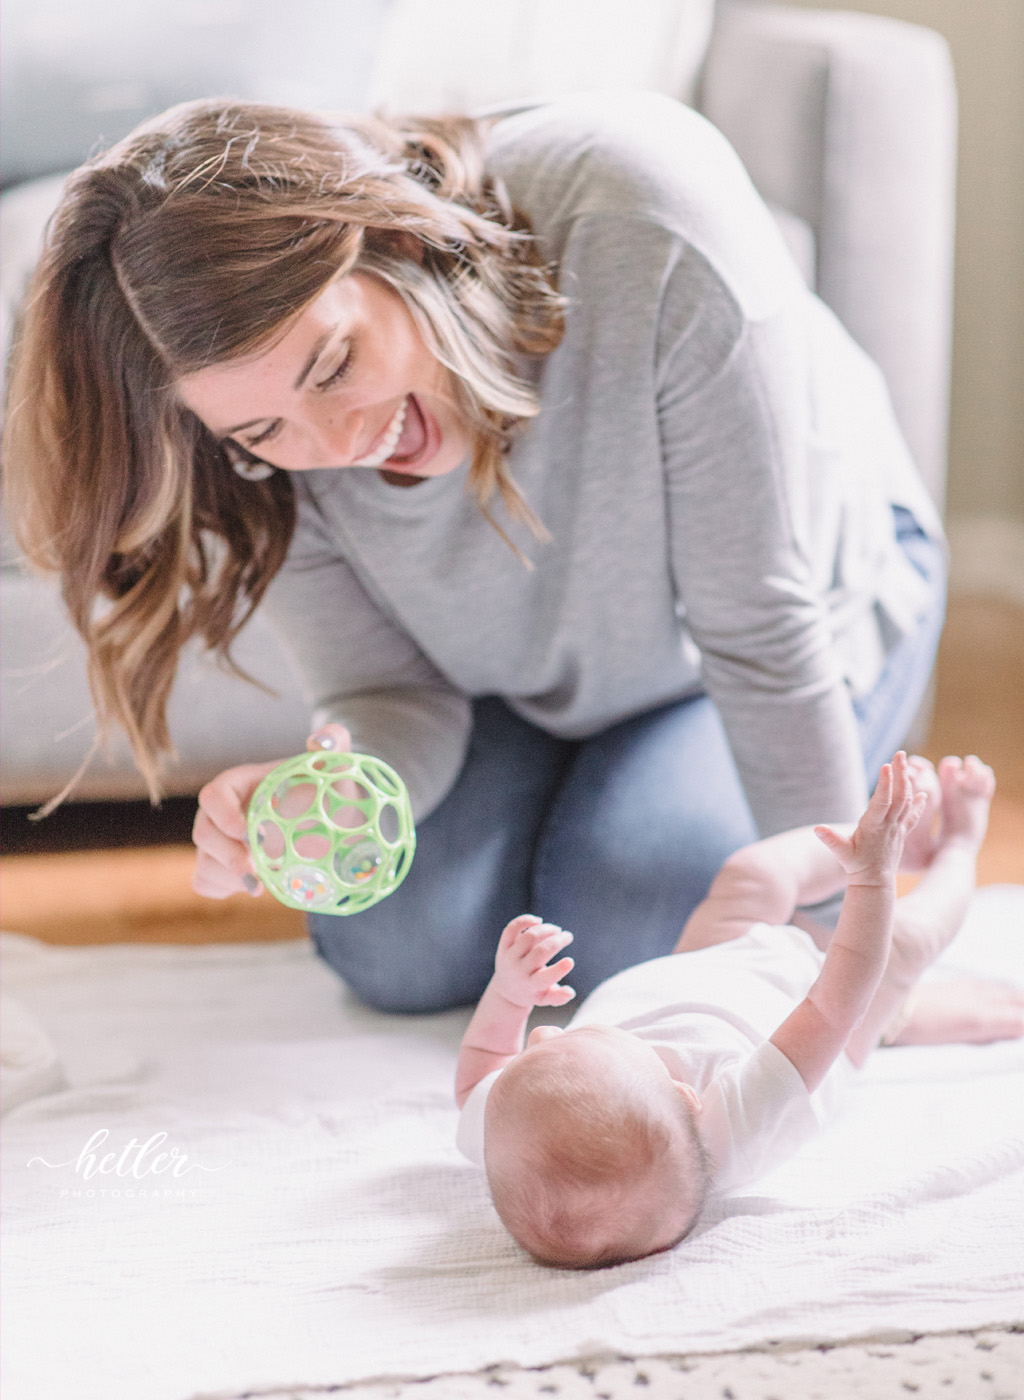 Grand Rapids branding photography for pediatric therapy website Sprout + Thrive